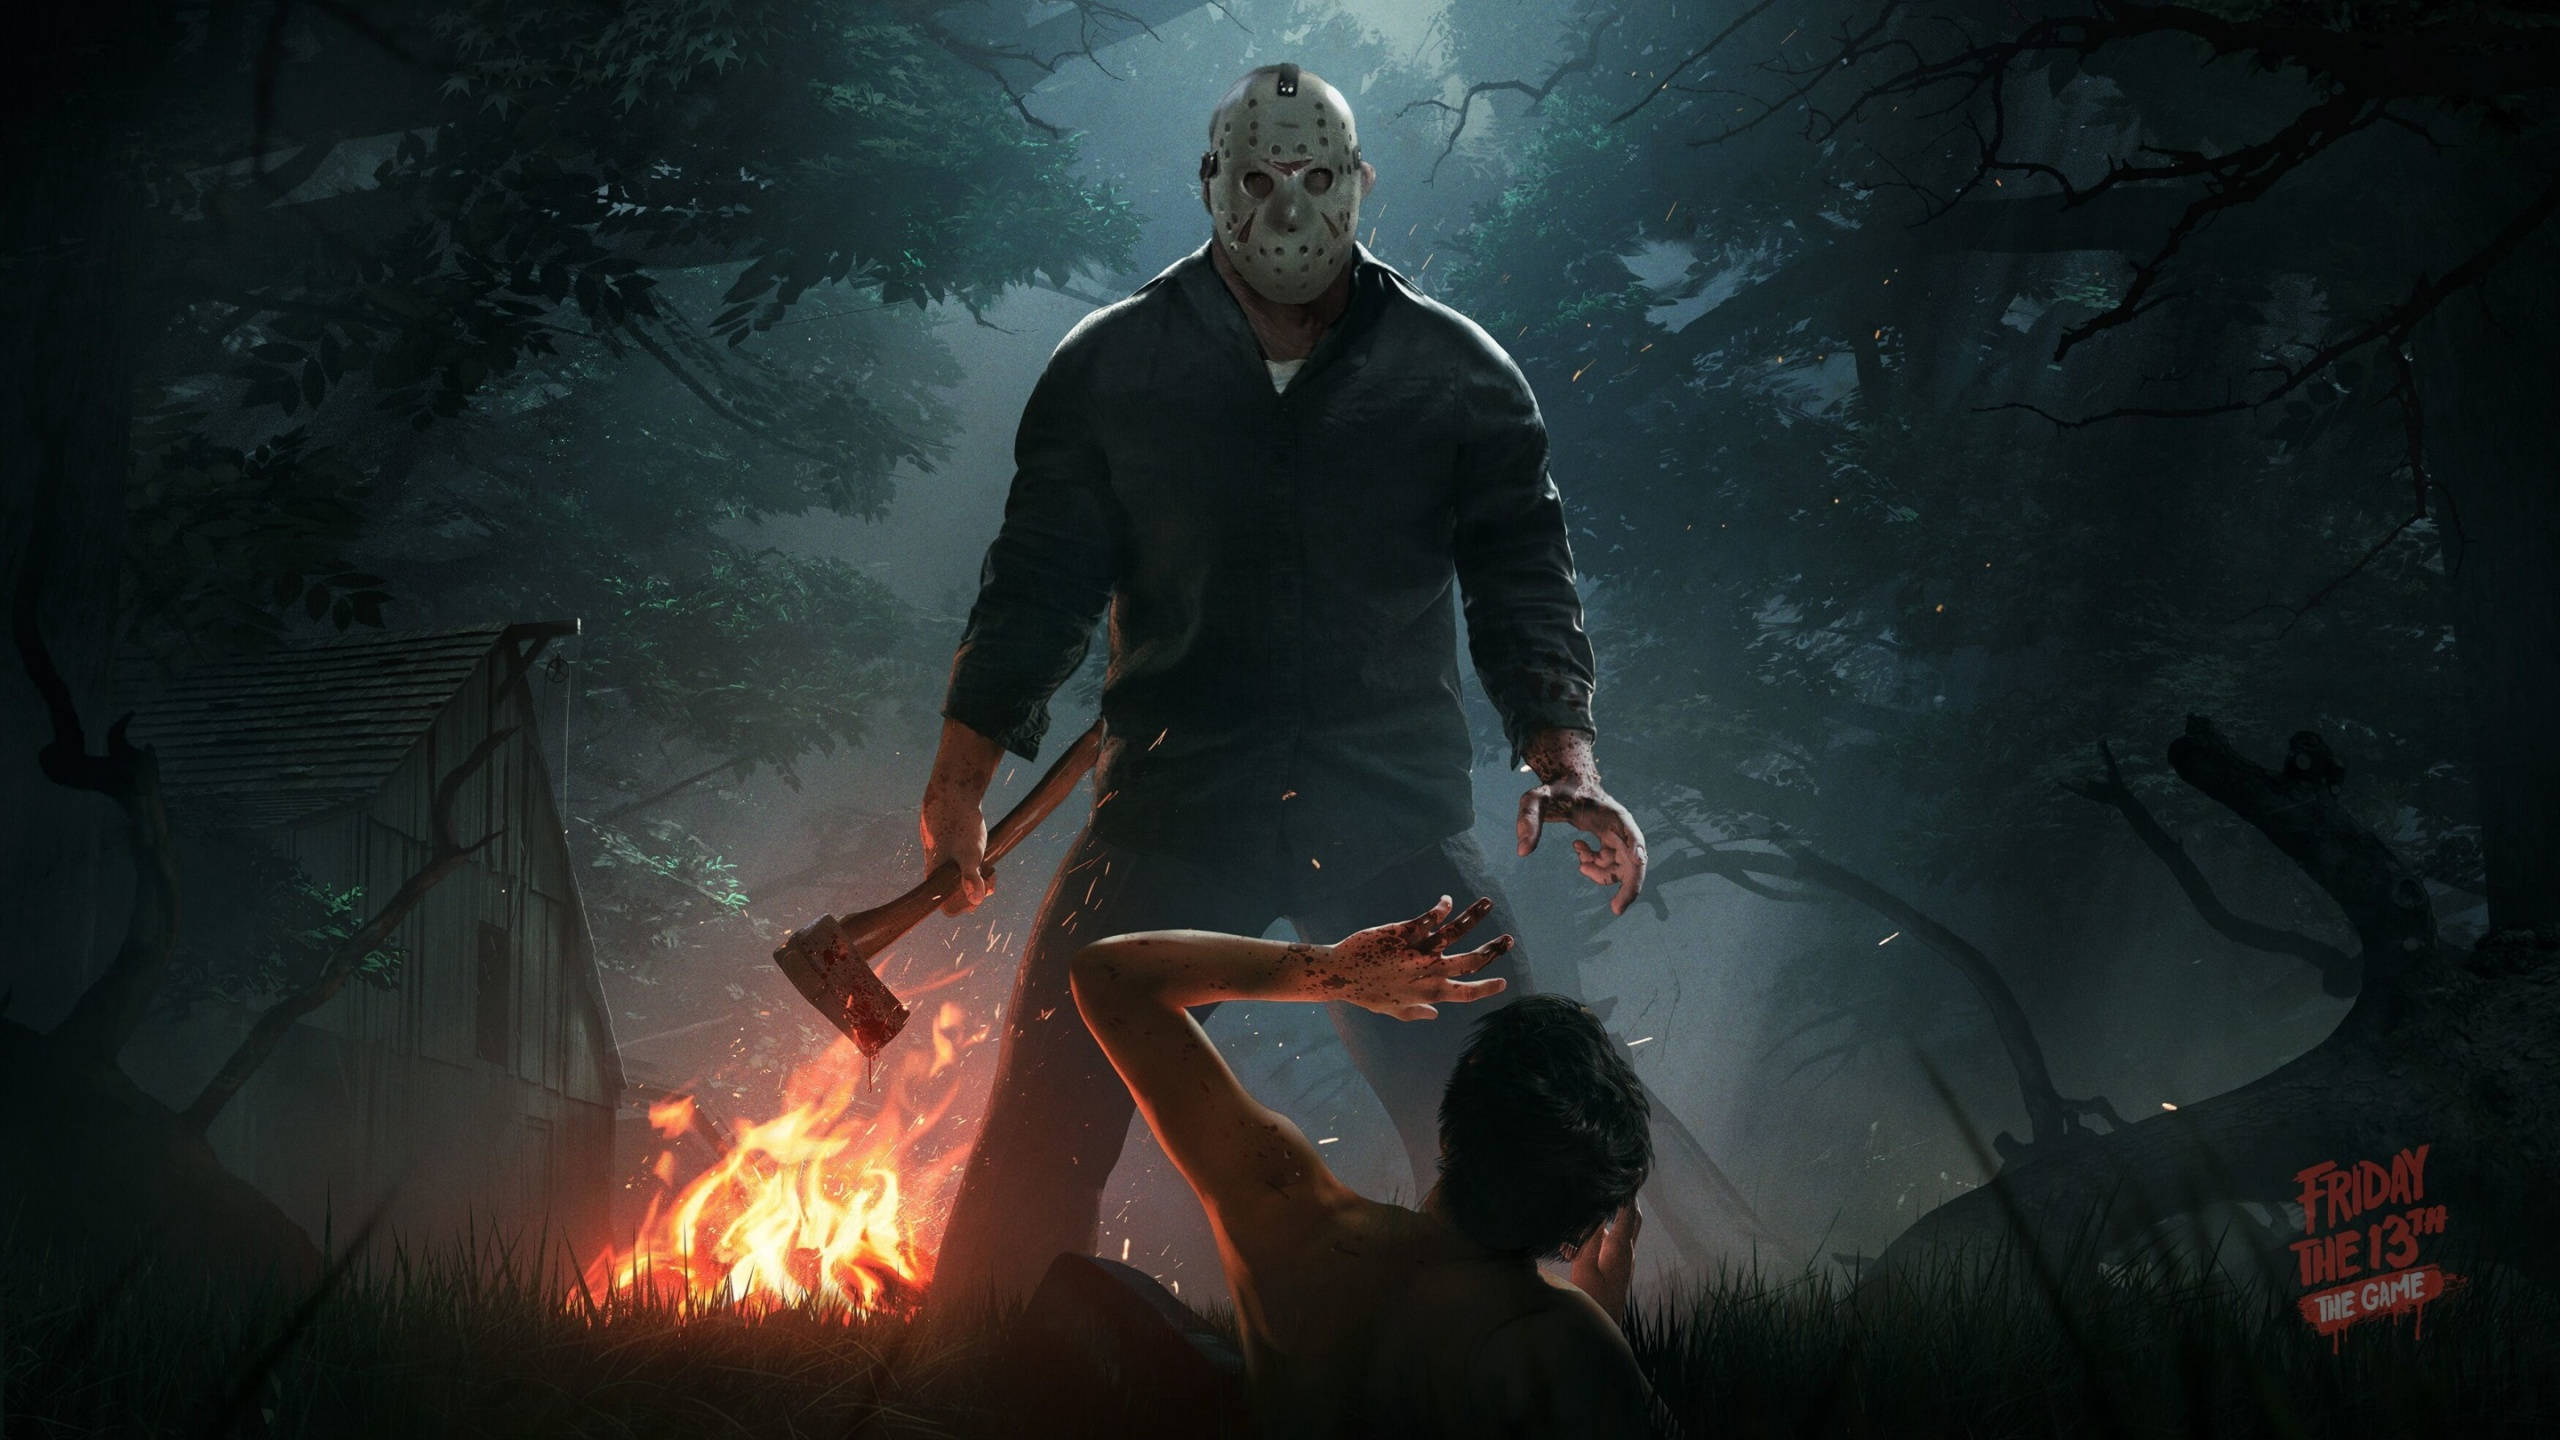 2560x1440 Gaming Friday The 13th Game Background